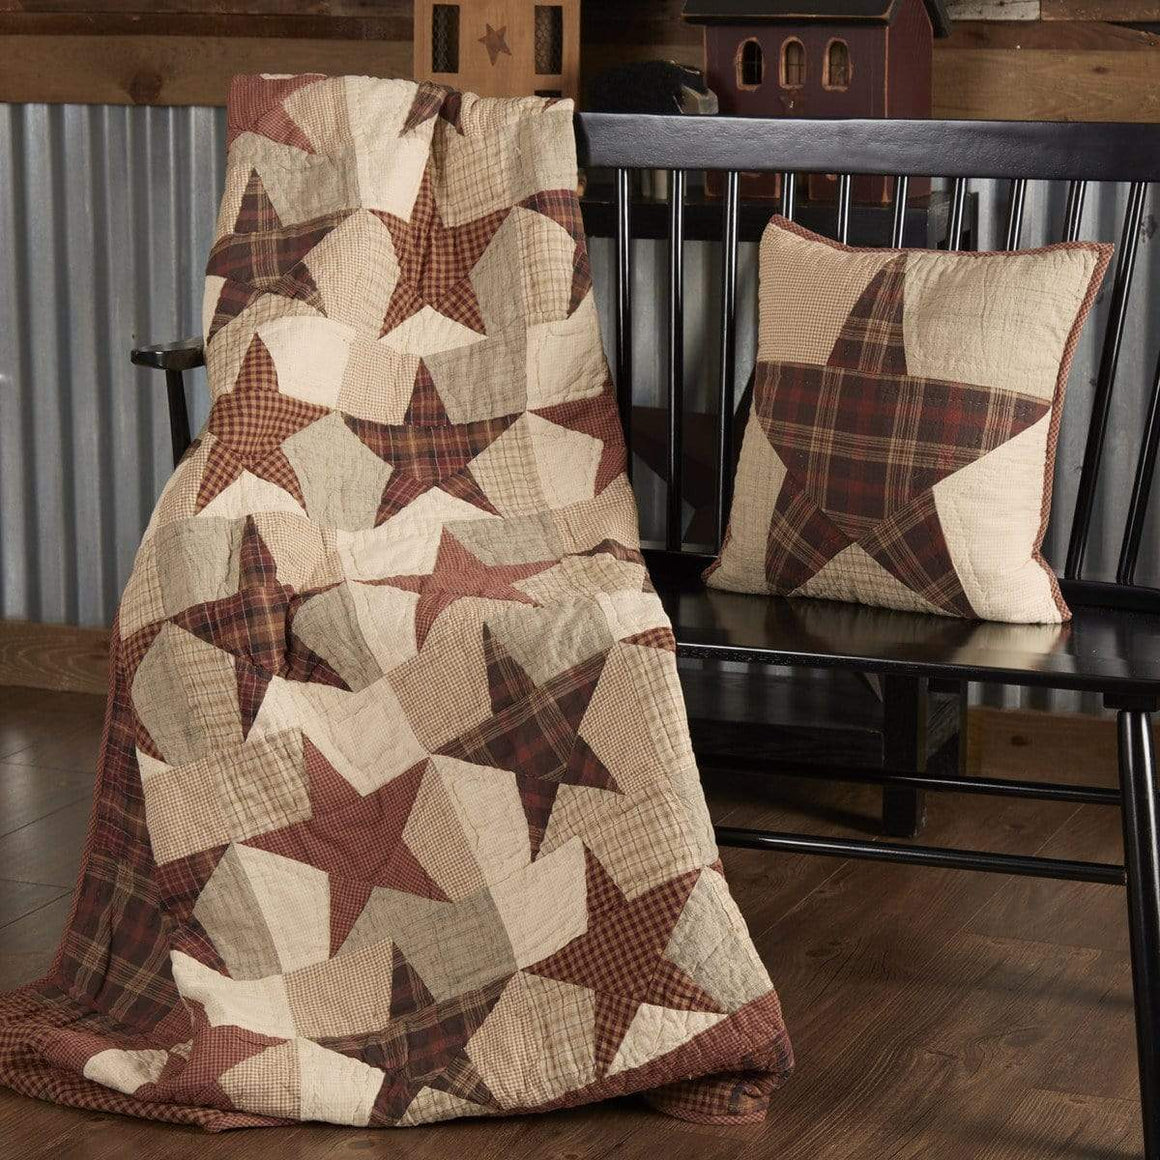 Abilene Star Quilted Throw / Wallhanging